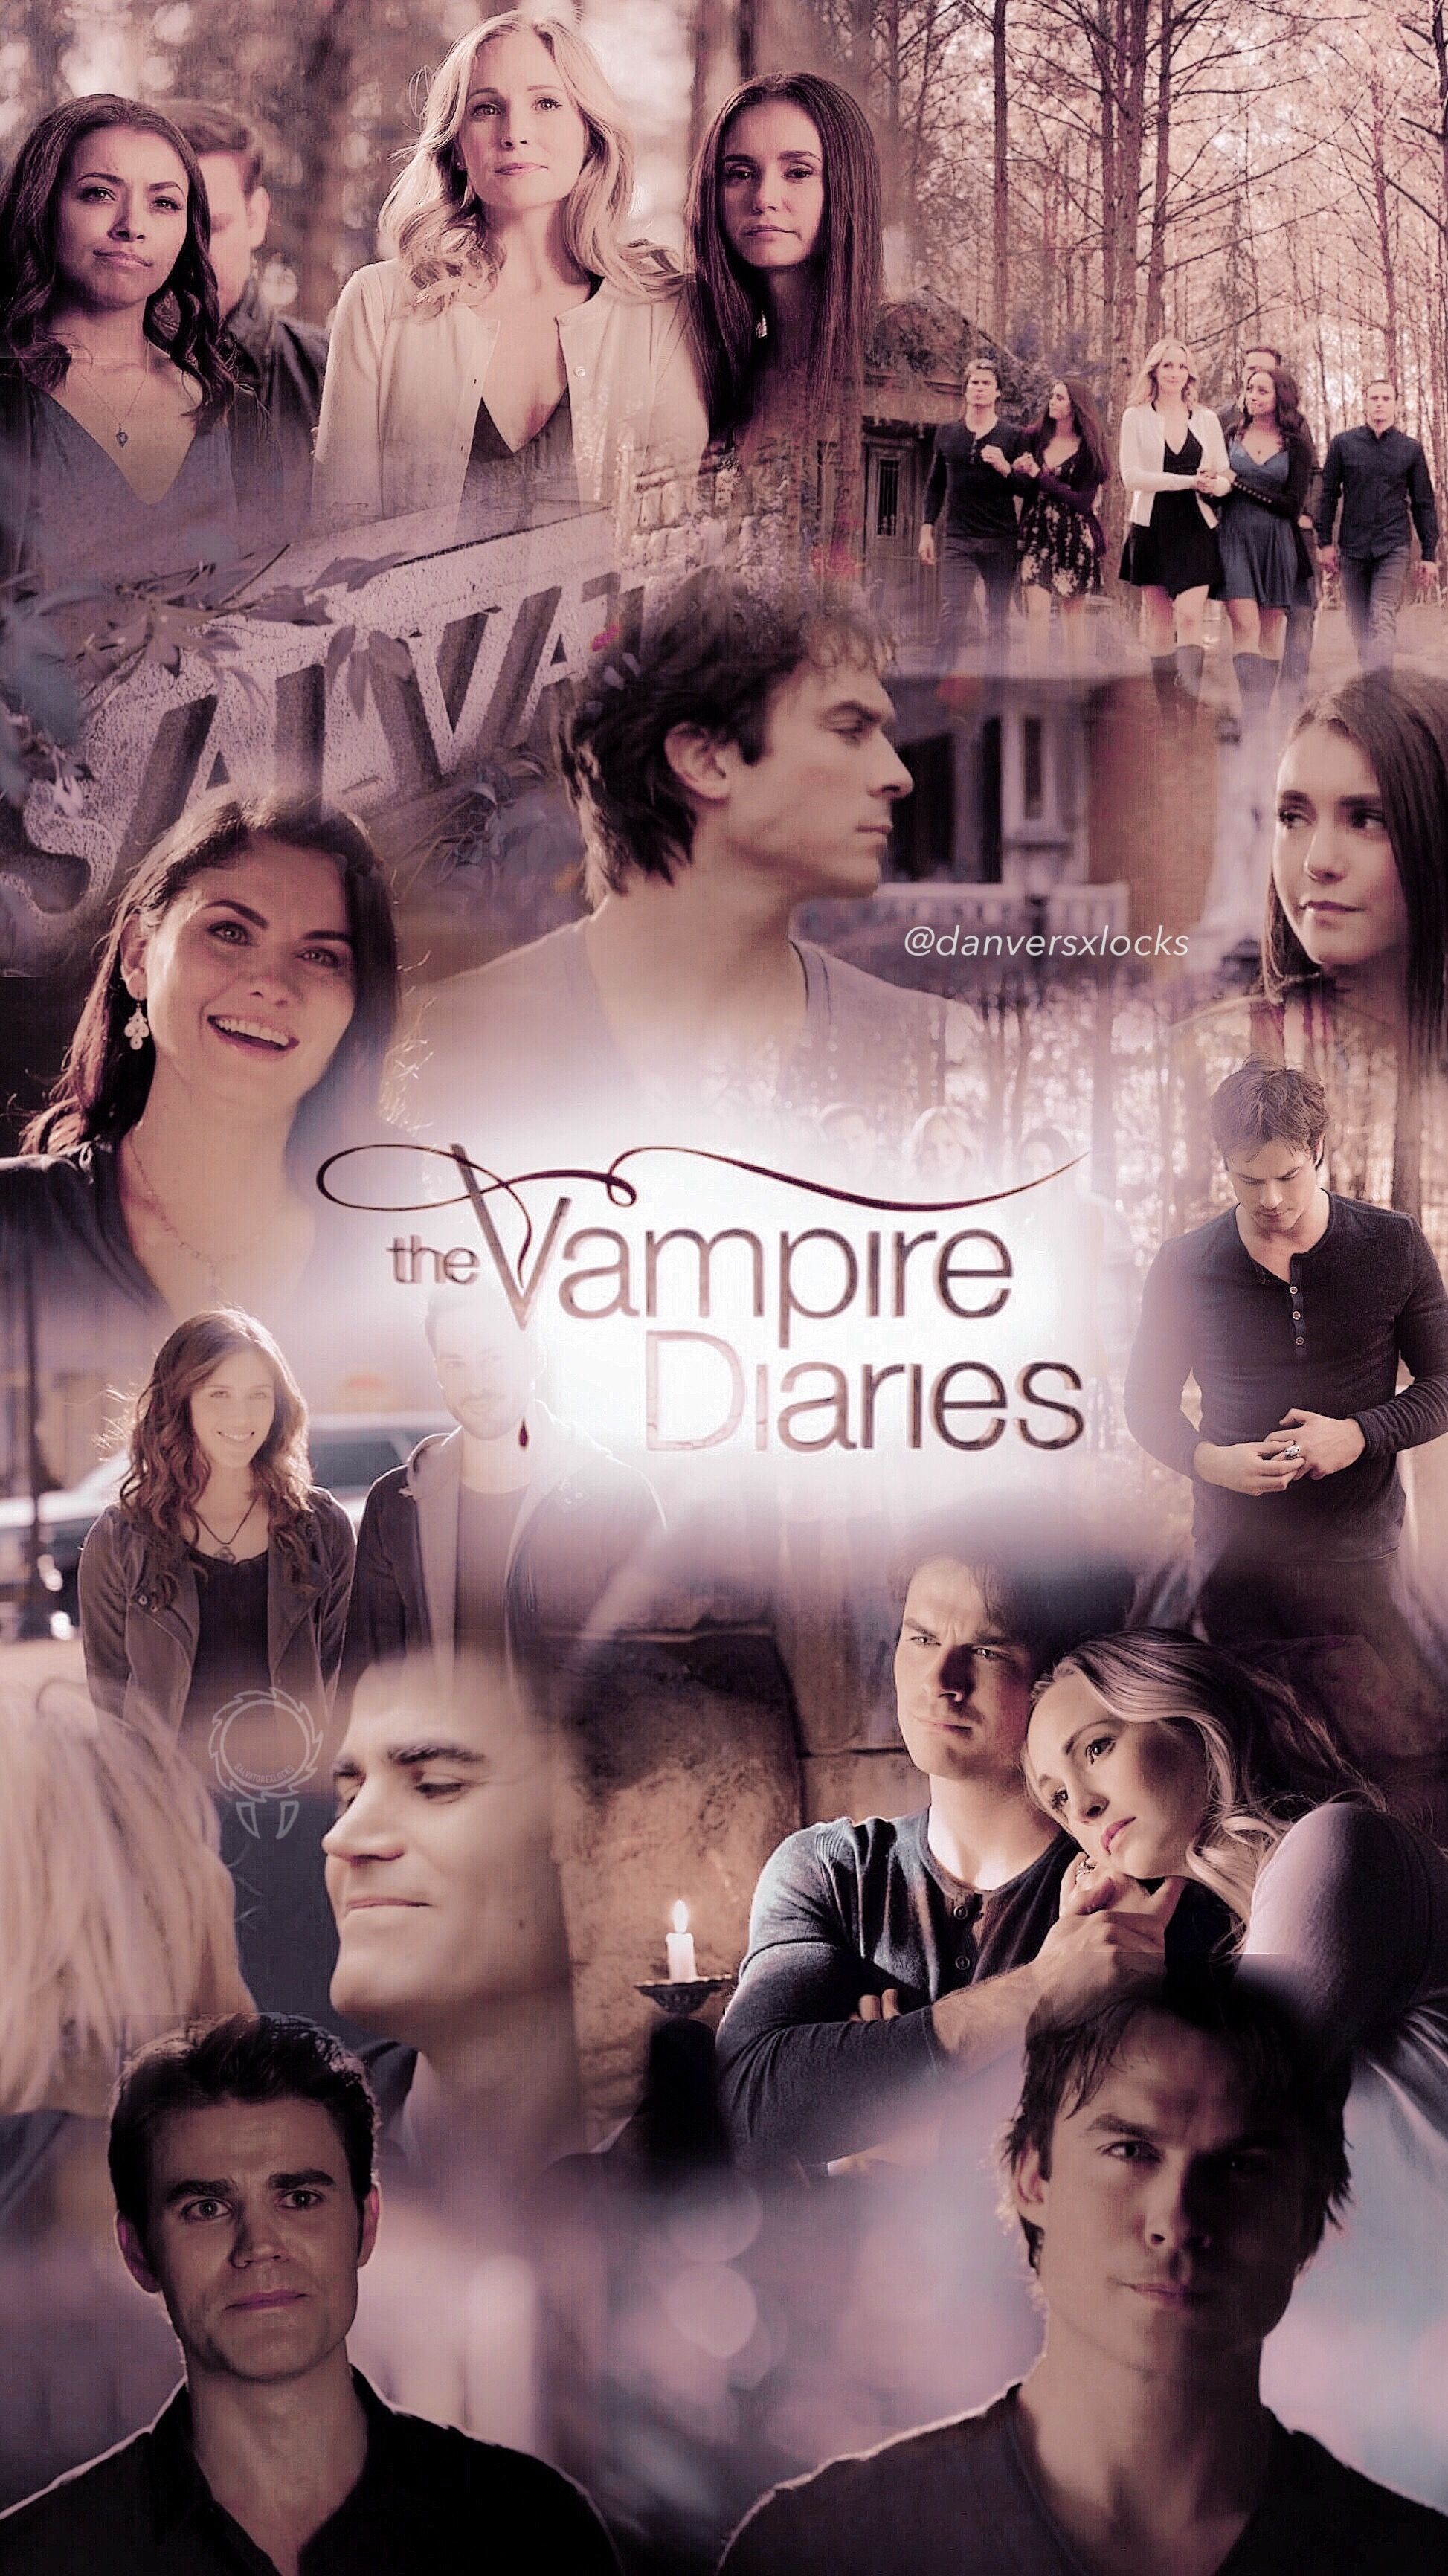 The Vampire Diaries Wallpaper for mobile phone tablet desktop computer  and other devices HD and  Vampire diaries wallpaper Vampire diaries  Popular book series